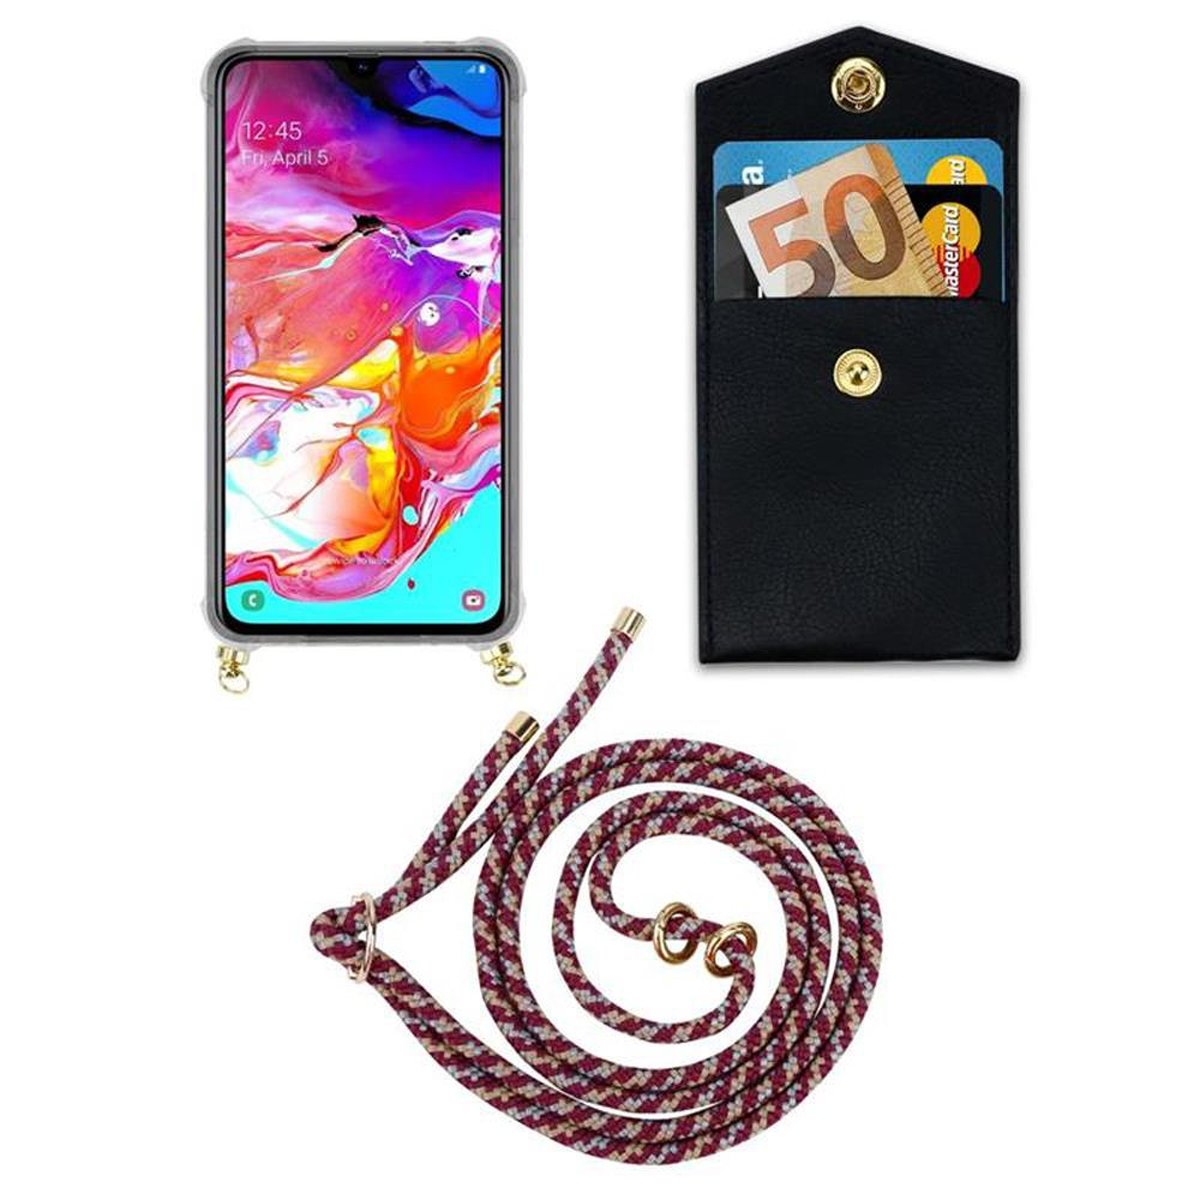 A70 ROT Hülle, GELB A70s, Ringen, Backcover, Samsung, mit Kordel / Kette Handy Galaxy CADORABO abnehmbarer WEIß Gold Band und